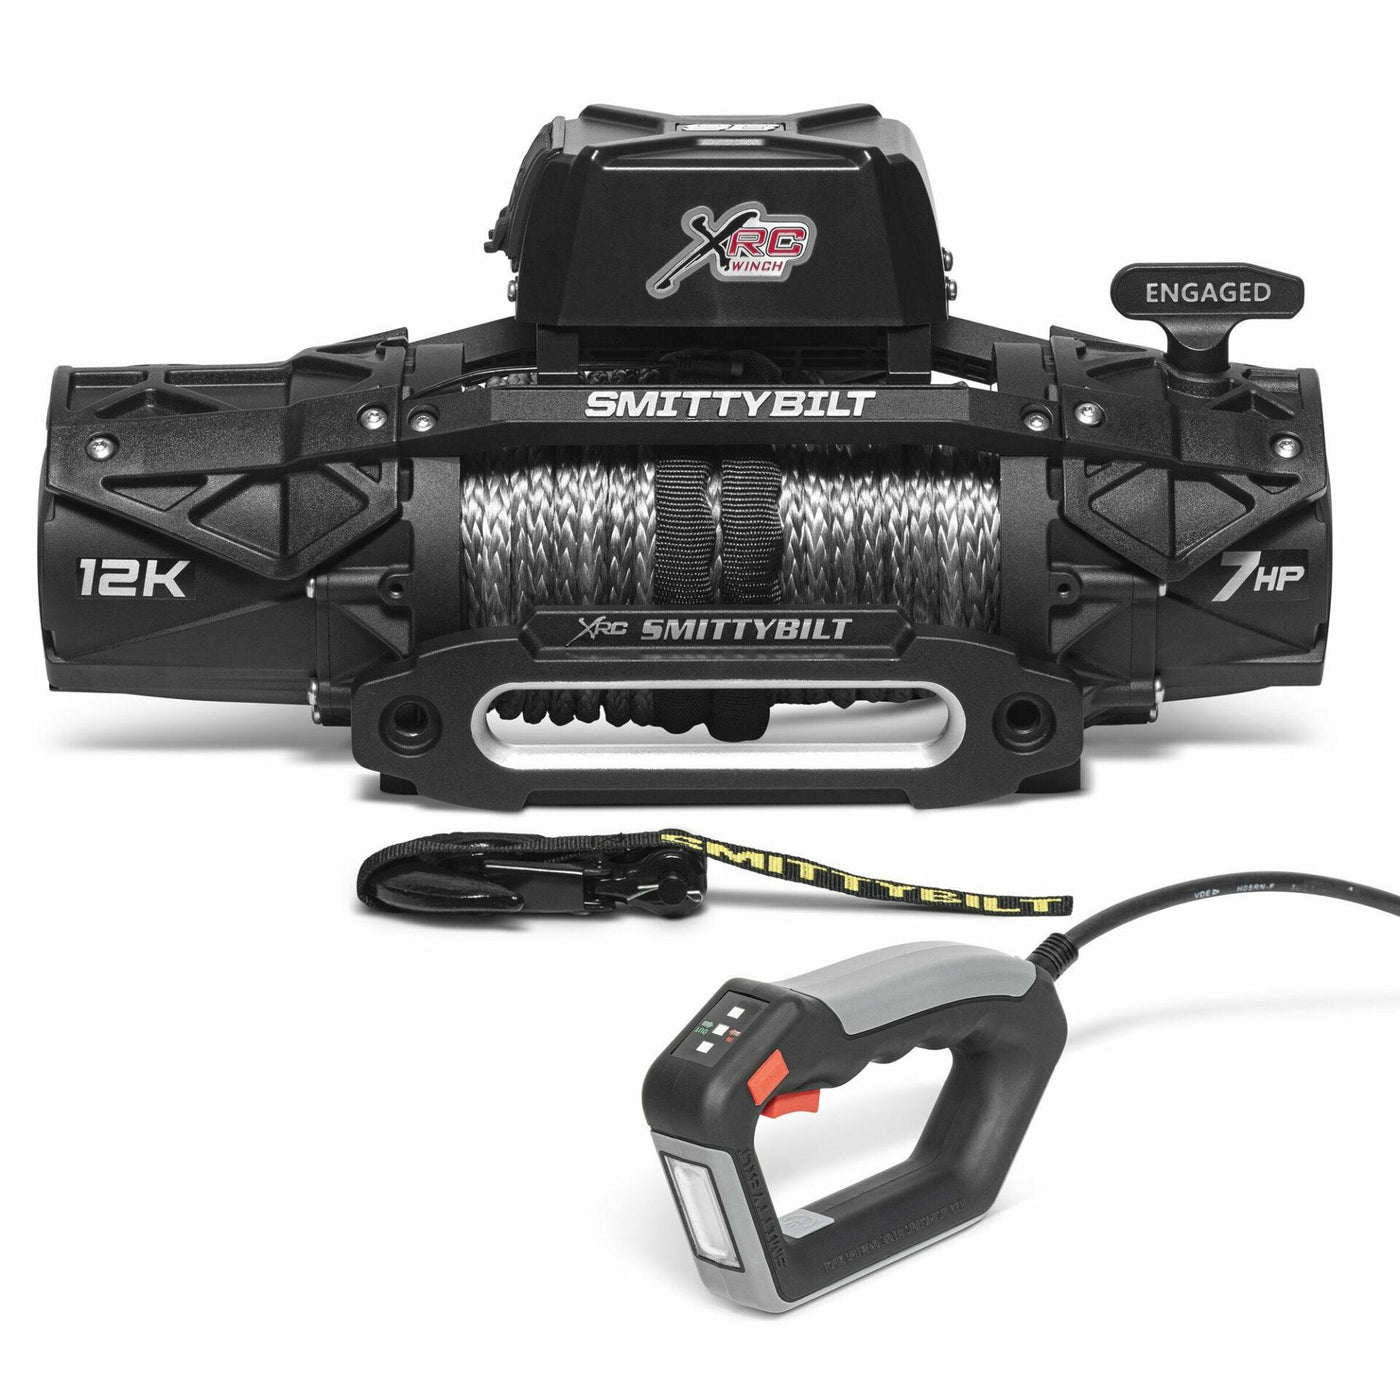 Smittybilt 98612 XRC GEN3 12K Comp Series Winch with Synthetic Cable